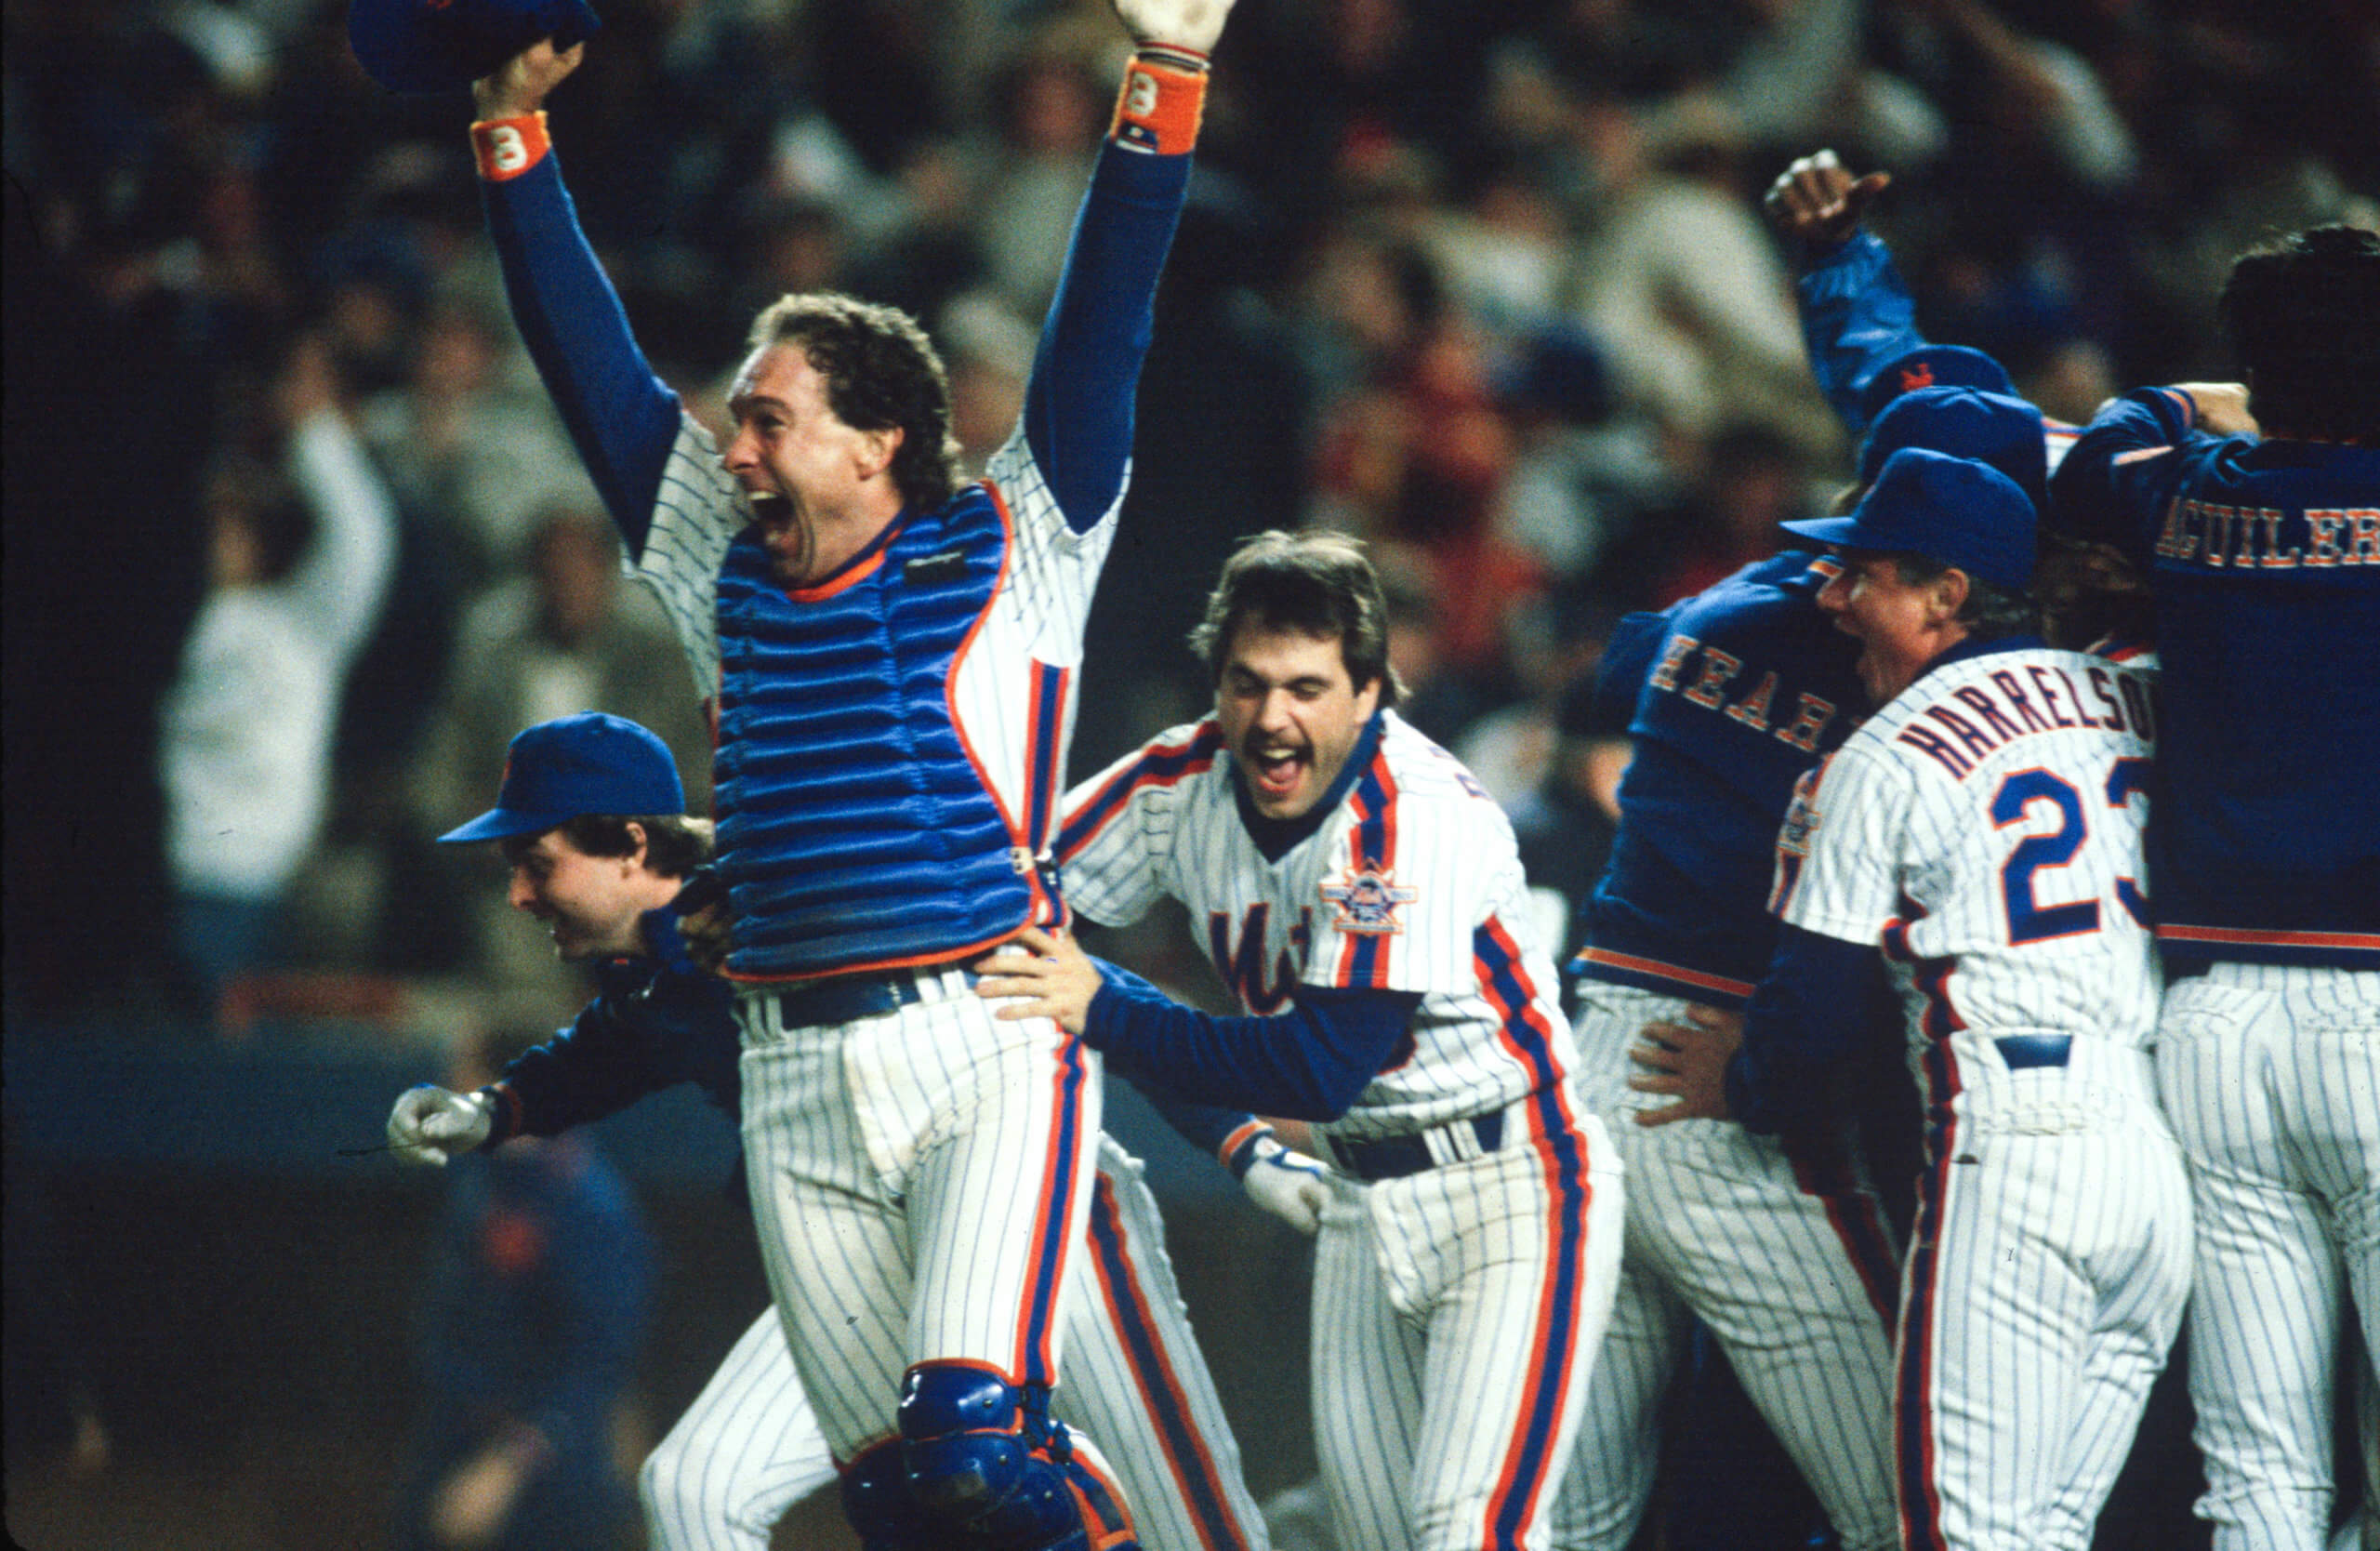 The Greatest MLB Showdown Project: 1986 New York Mets